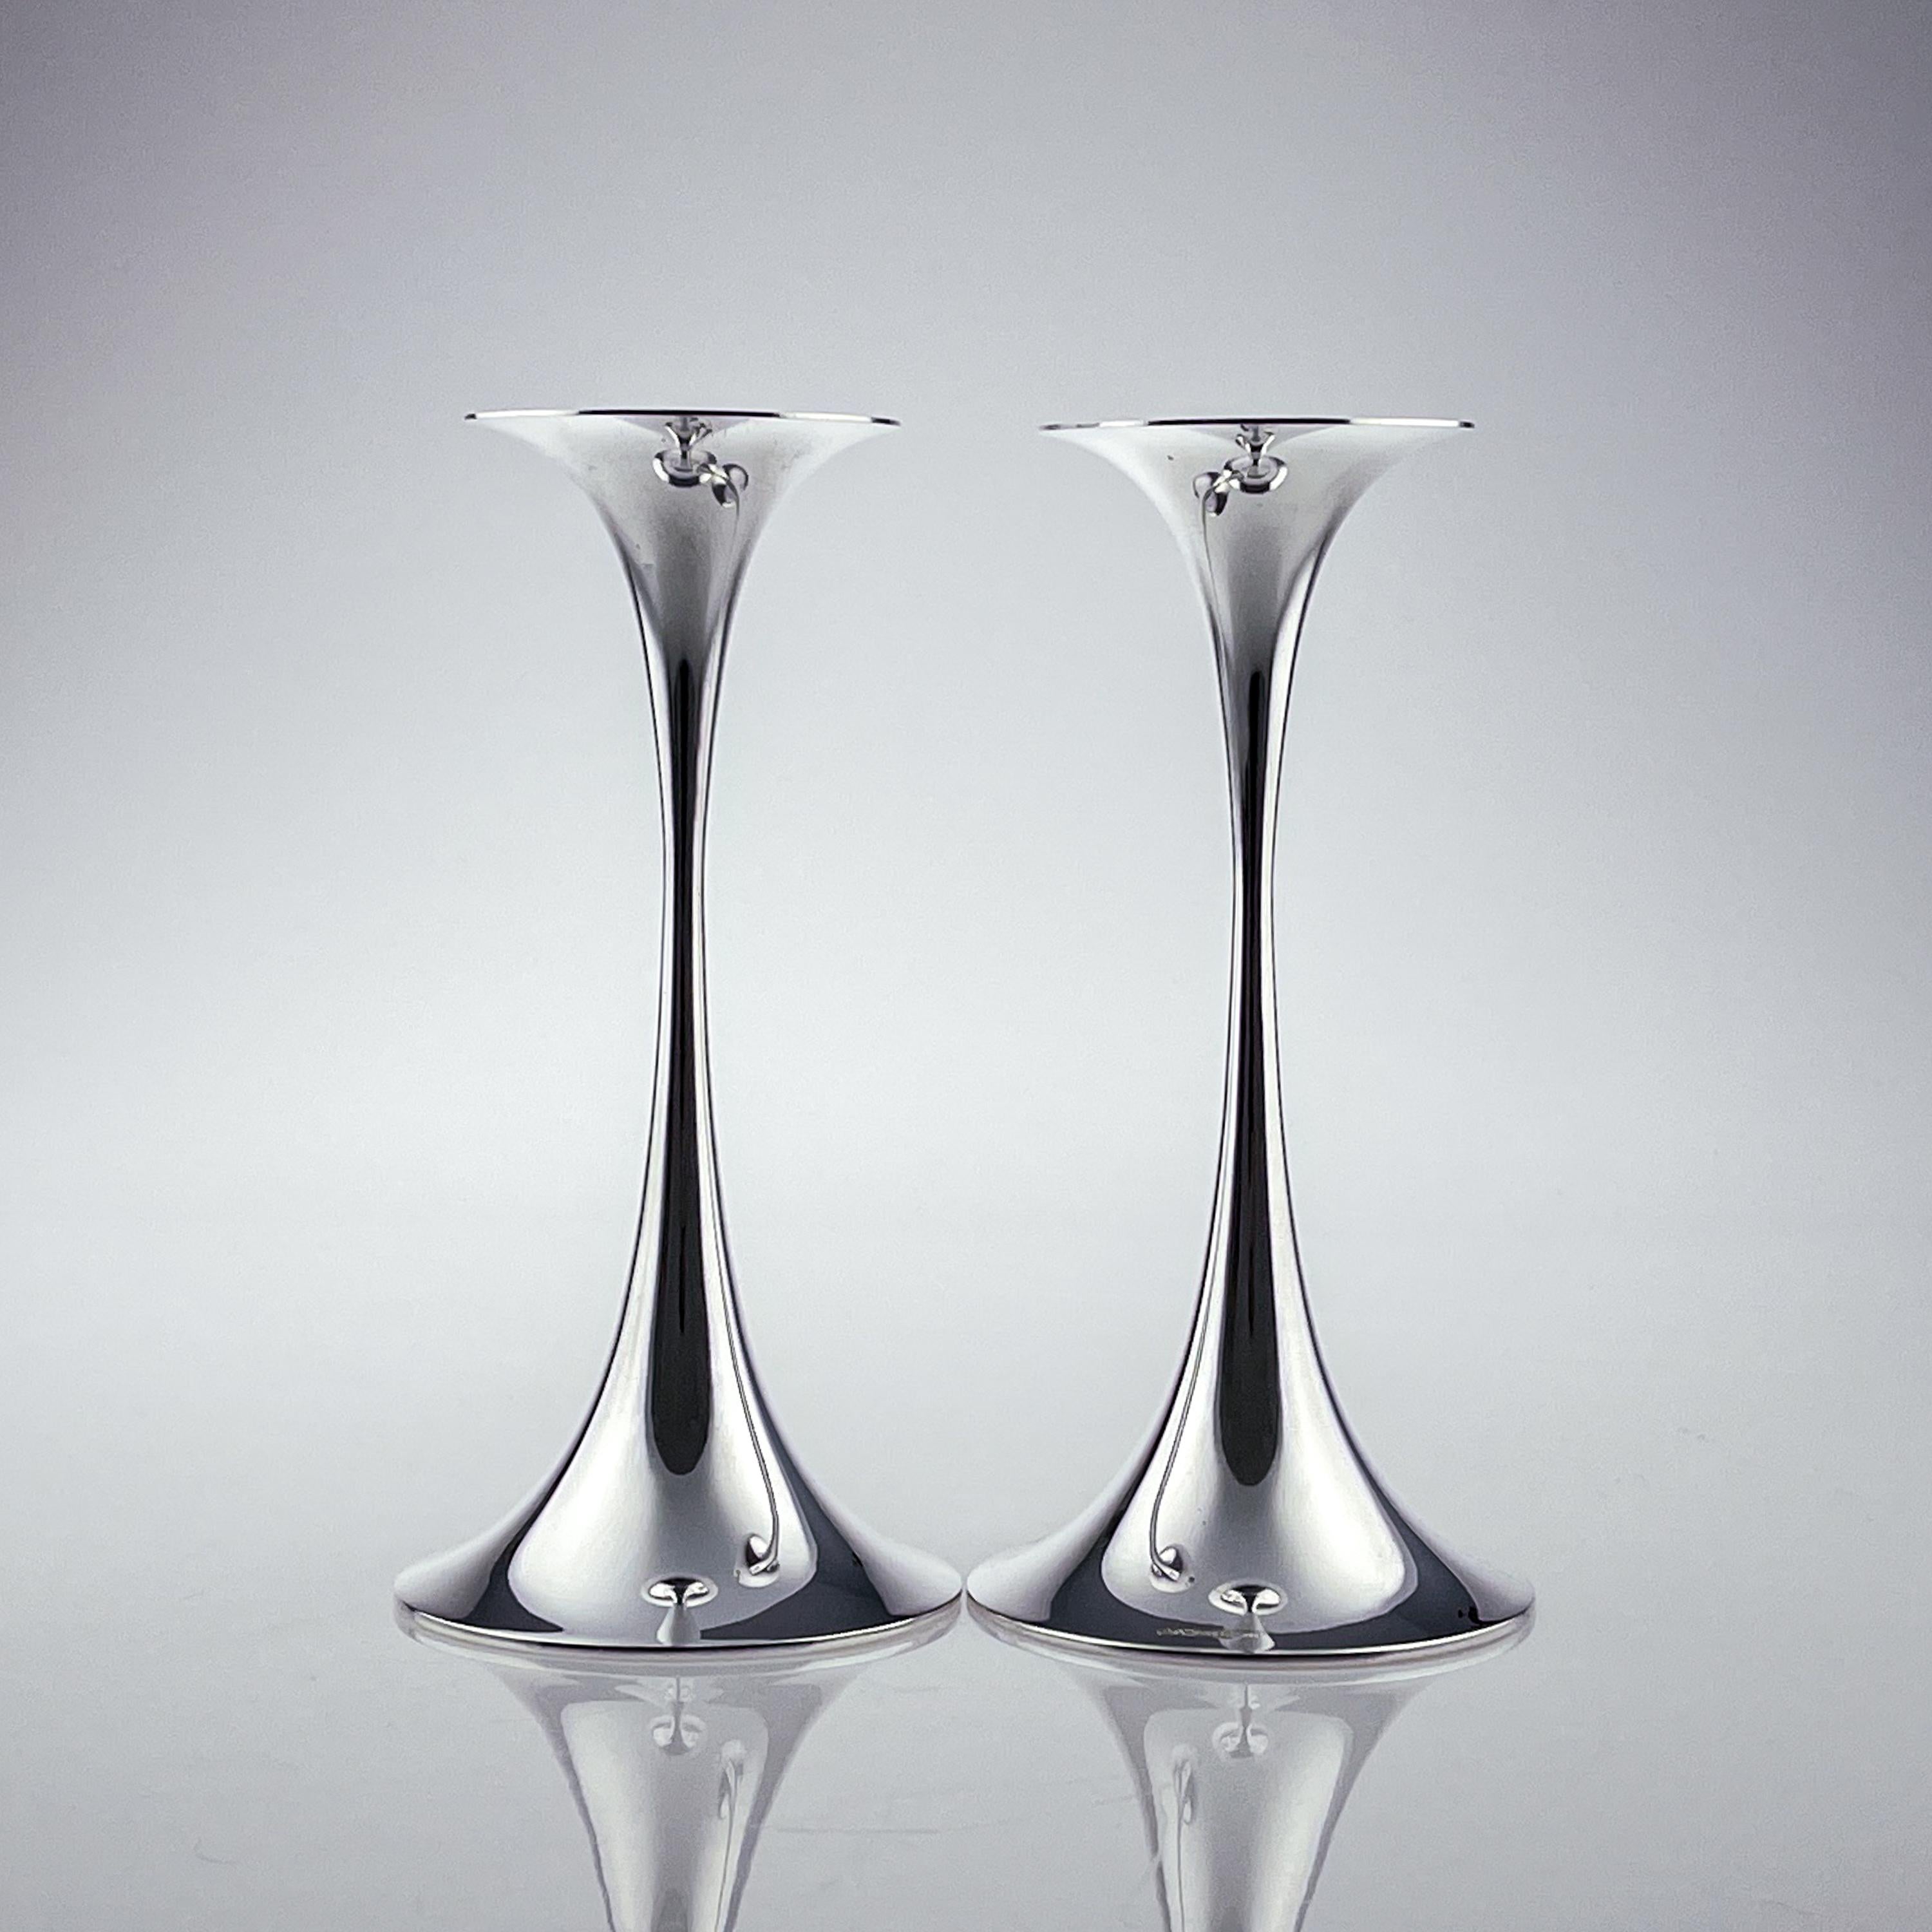 Tapio Wirkkala, A largest size pair of silver “Trumpetti” candlesticks, 1982

A largest size pair of silver “Trumpetti” candlesticks model TW 284, designed by Tapio Wirkkala in 1963. Executed by the craftsmen of Kultakeskus Oy in the town of